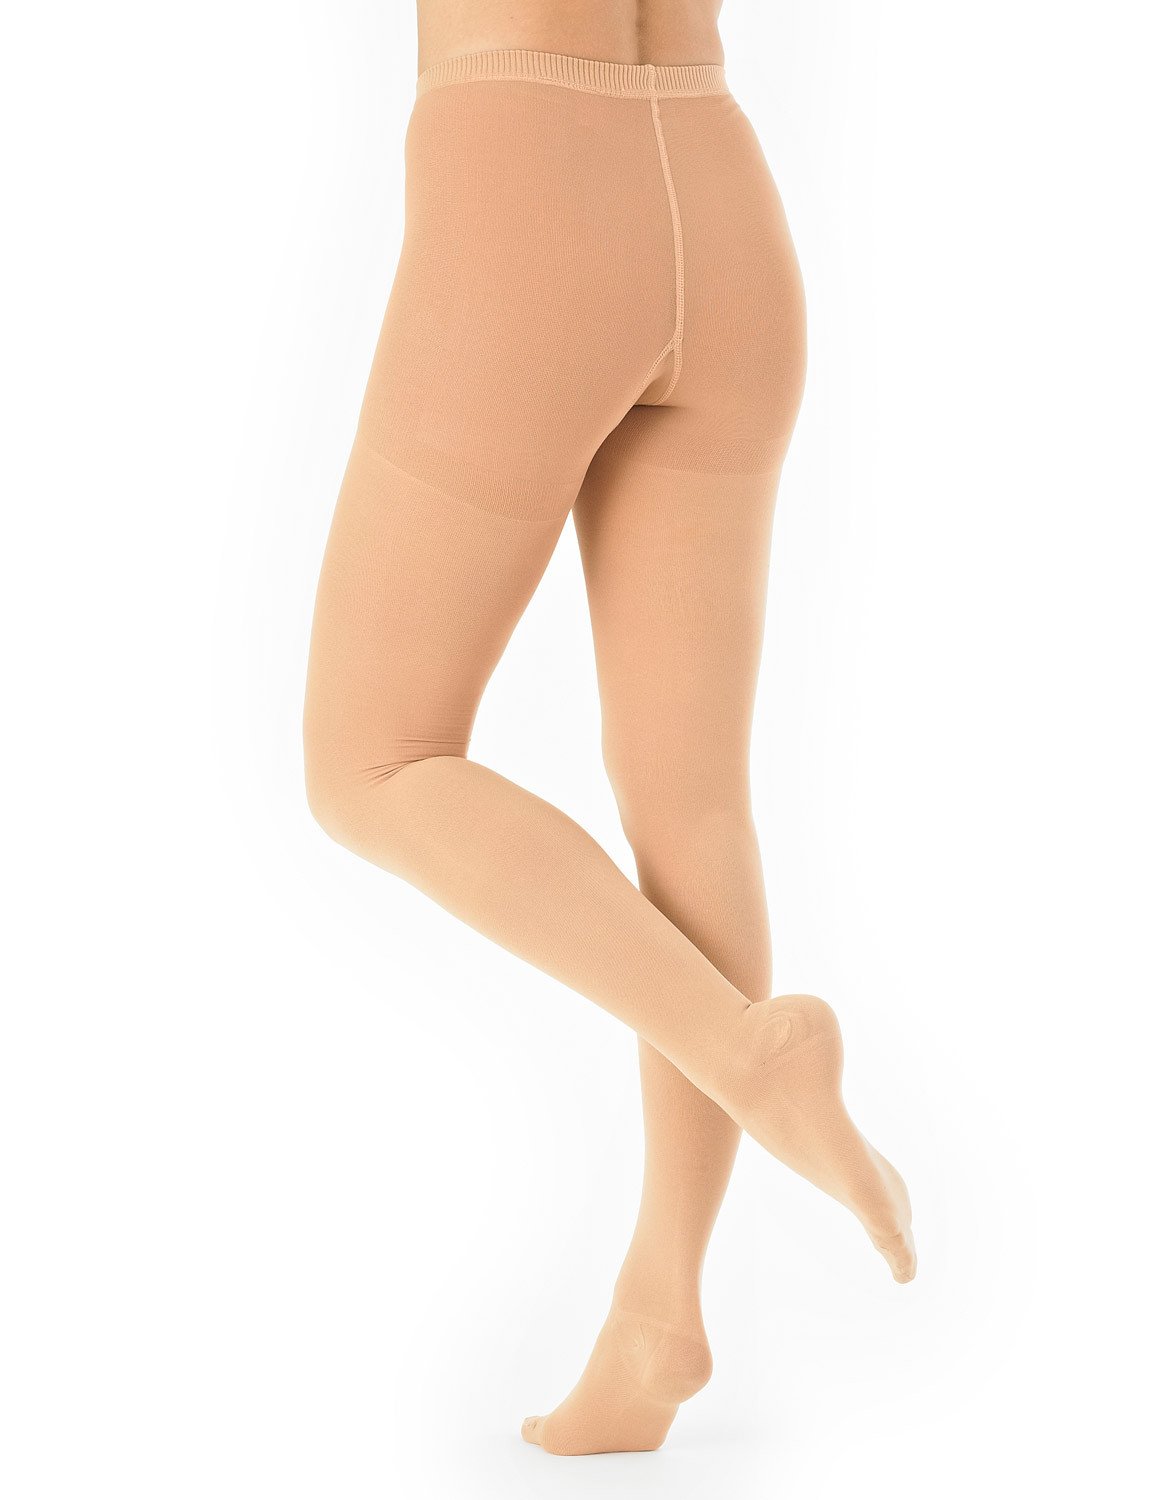 Neo G Pantyhose Compression Hosiery (Closed Toe)